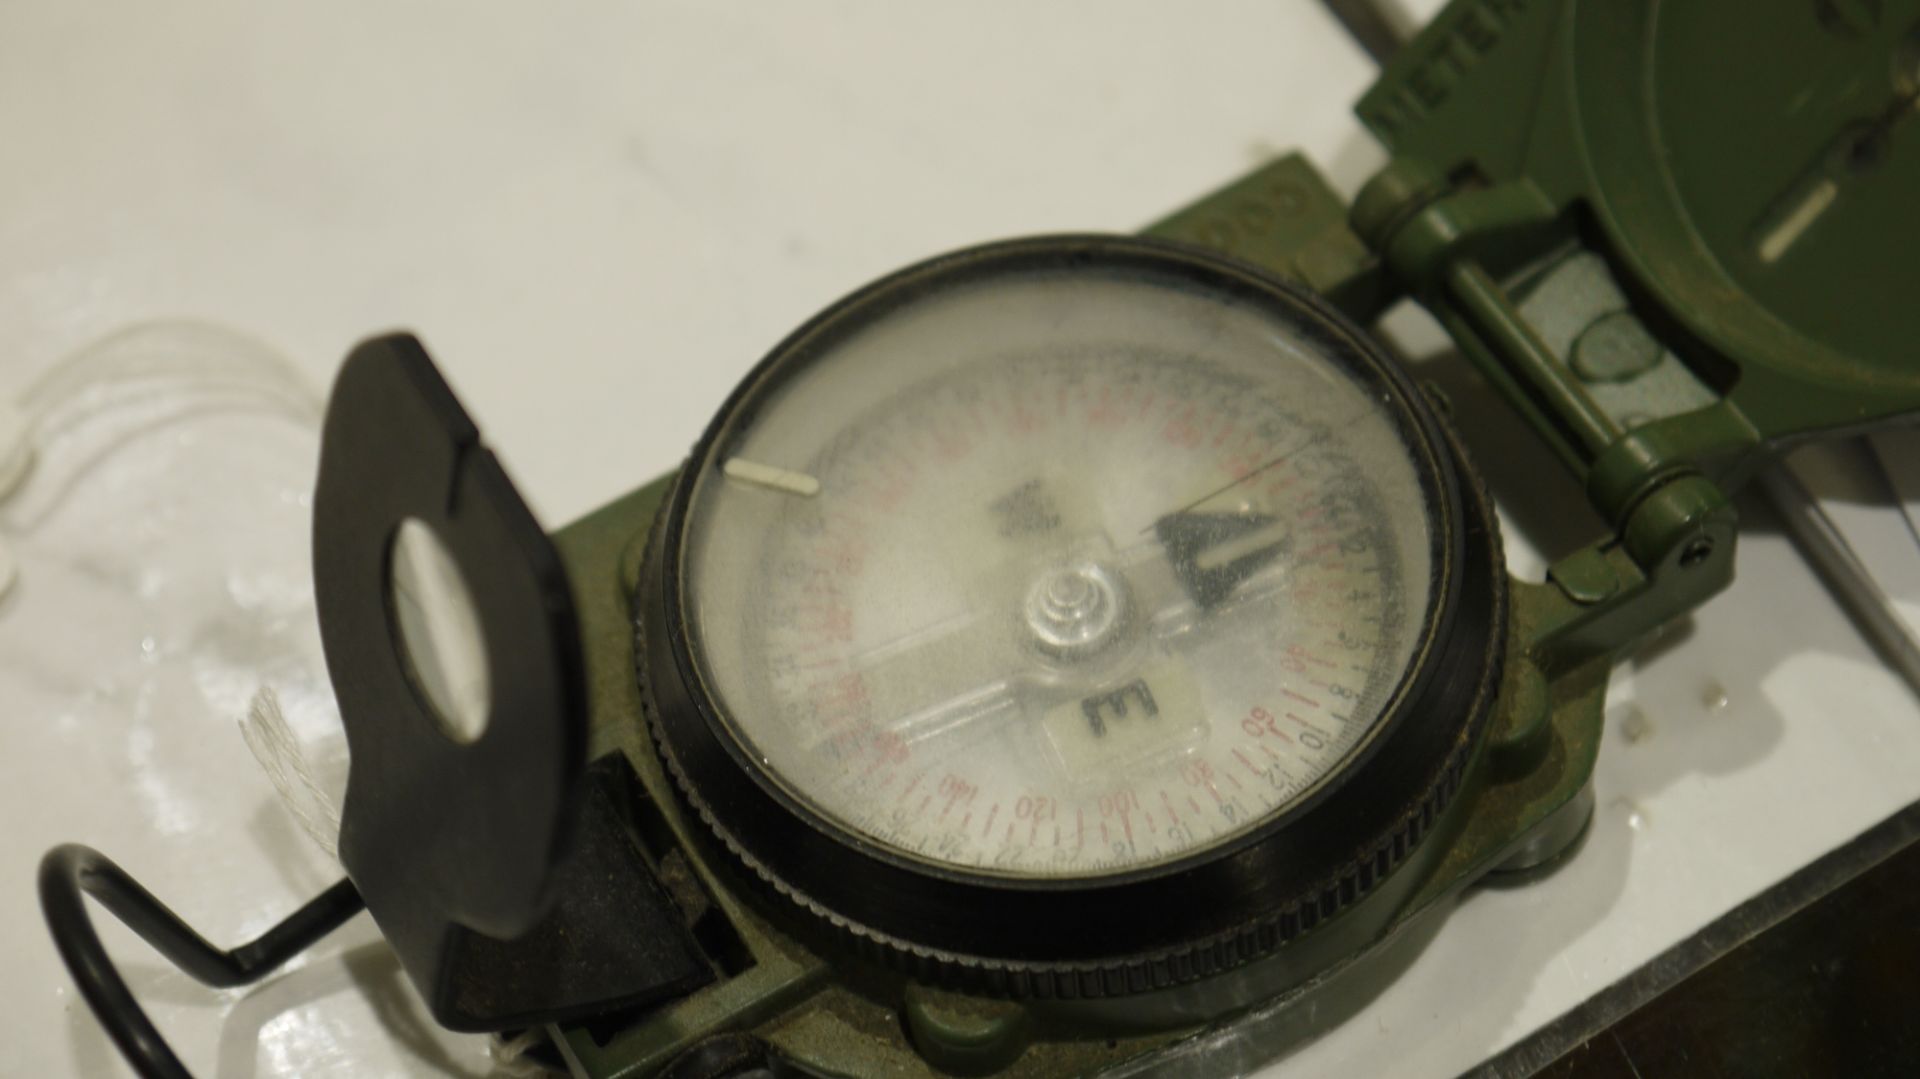 German 'Original Bezard' 1940s pocket compass in military style case and a U.S. military issue - Image 10 of 11